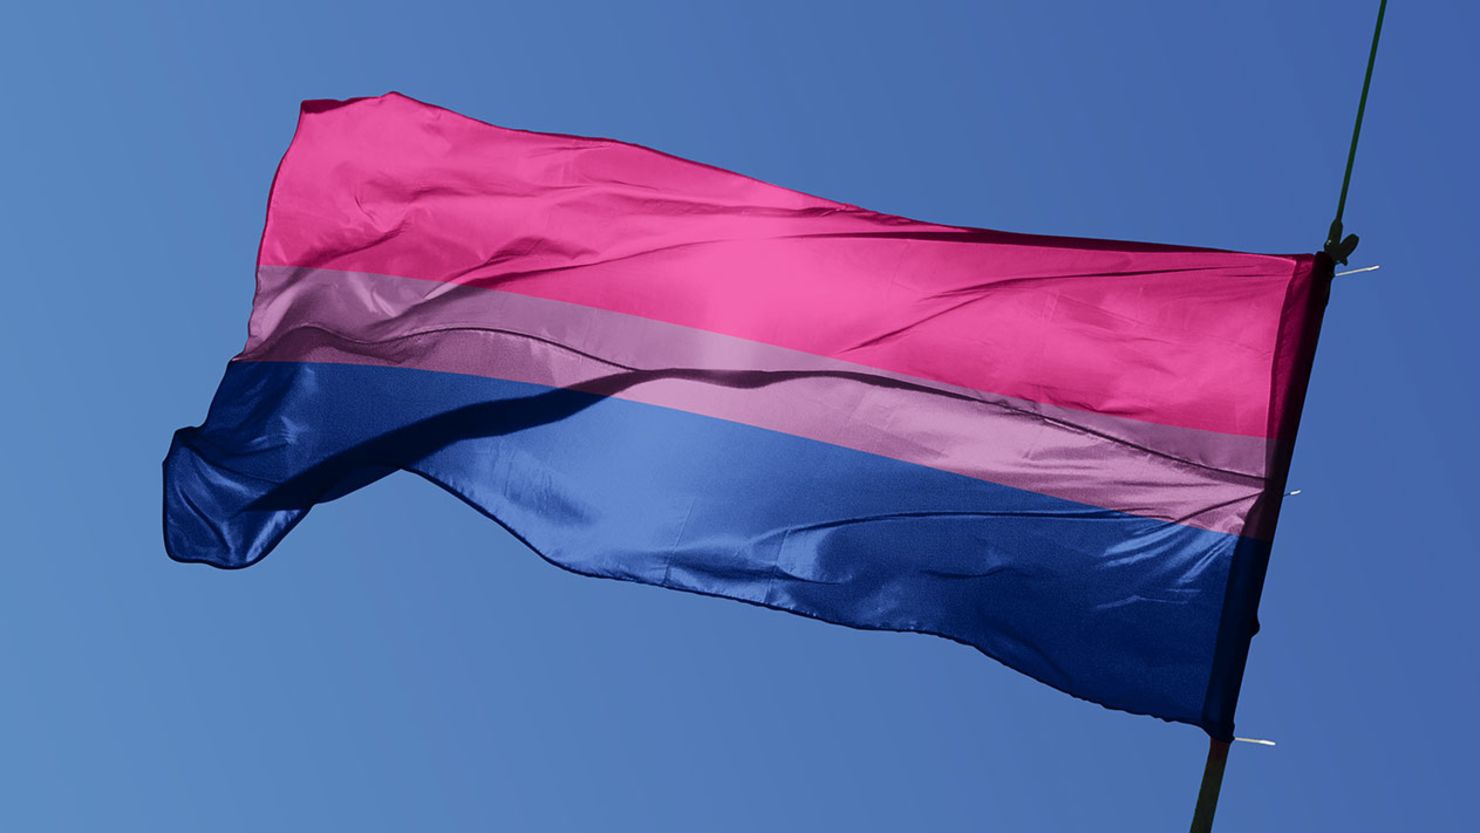 Natalie Schriefer writes that the constant questioning of bisexual people is one of the ramifications of bi erasure.